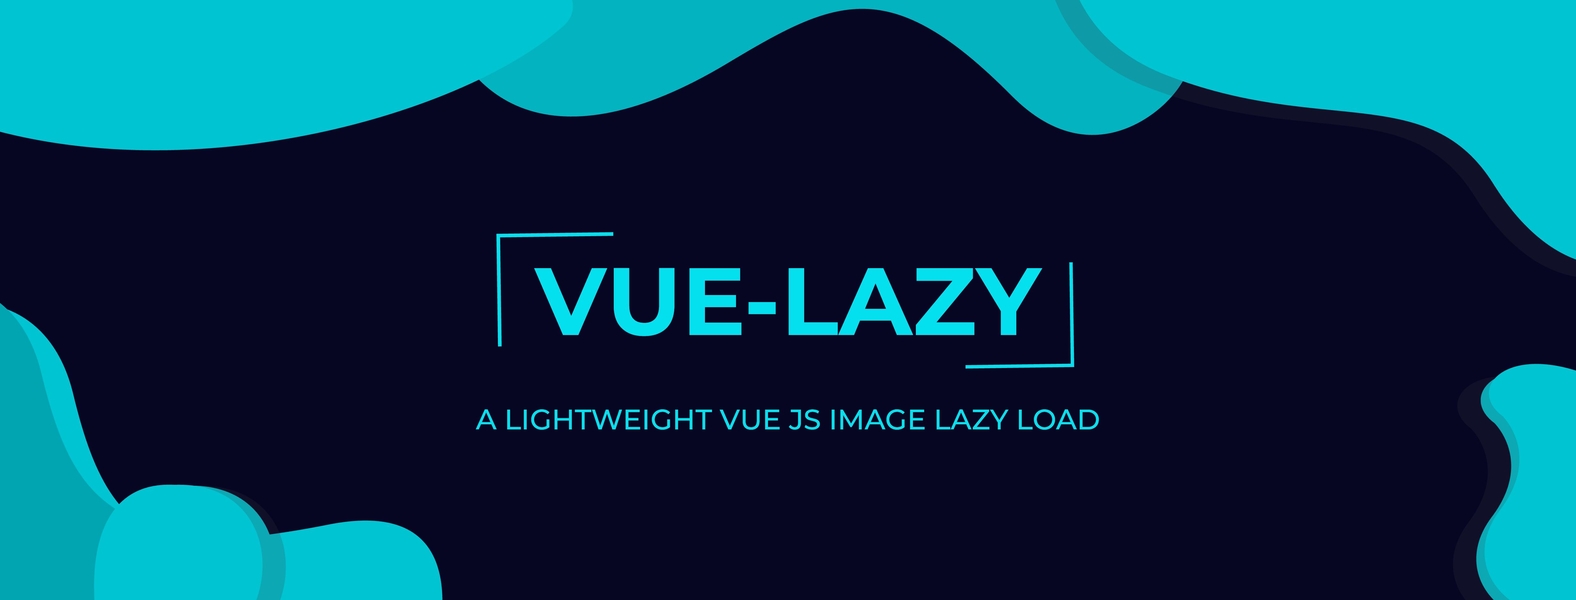 Vue Lazy – A Lightweight Image Lazy Load Vue Component  